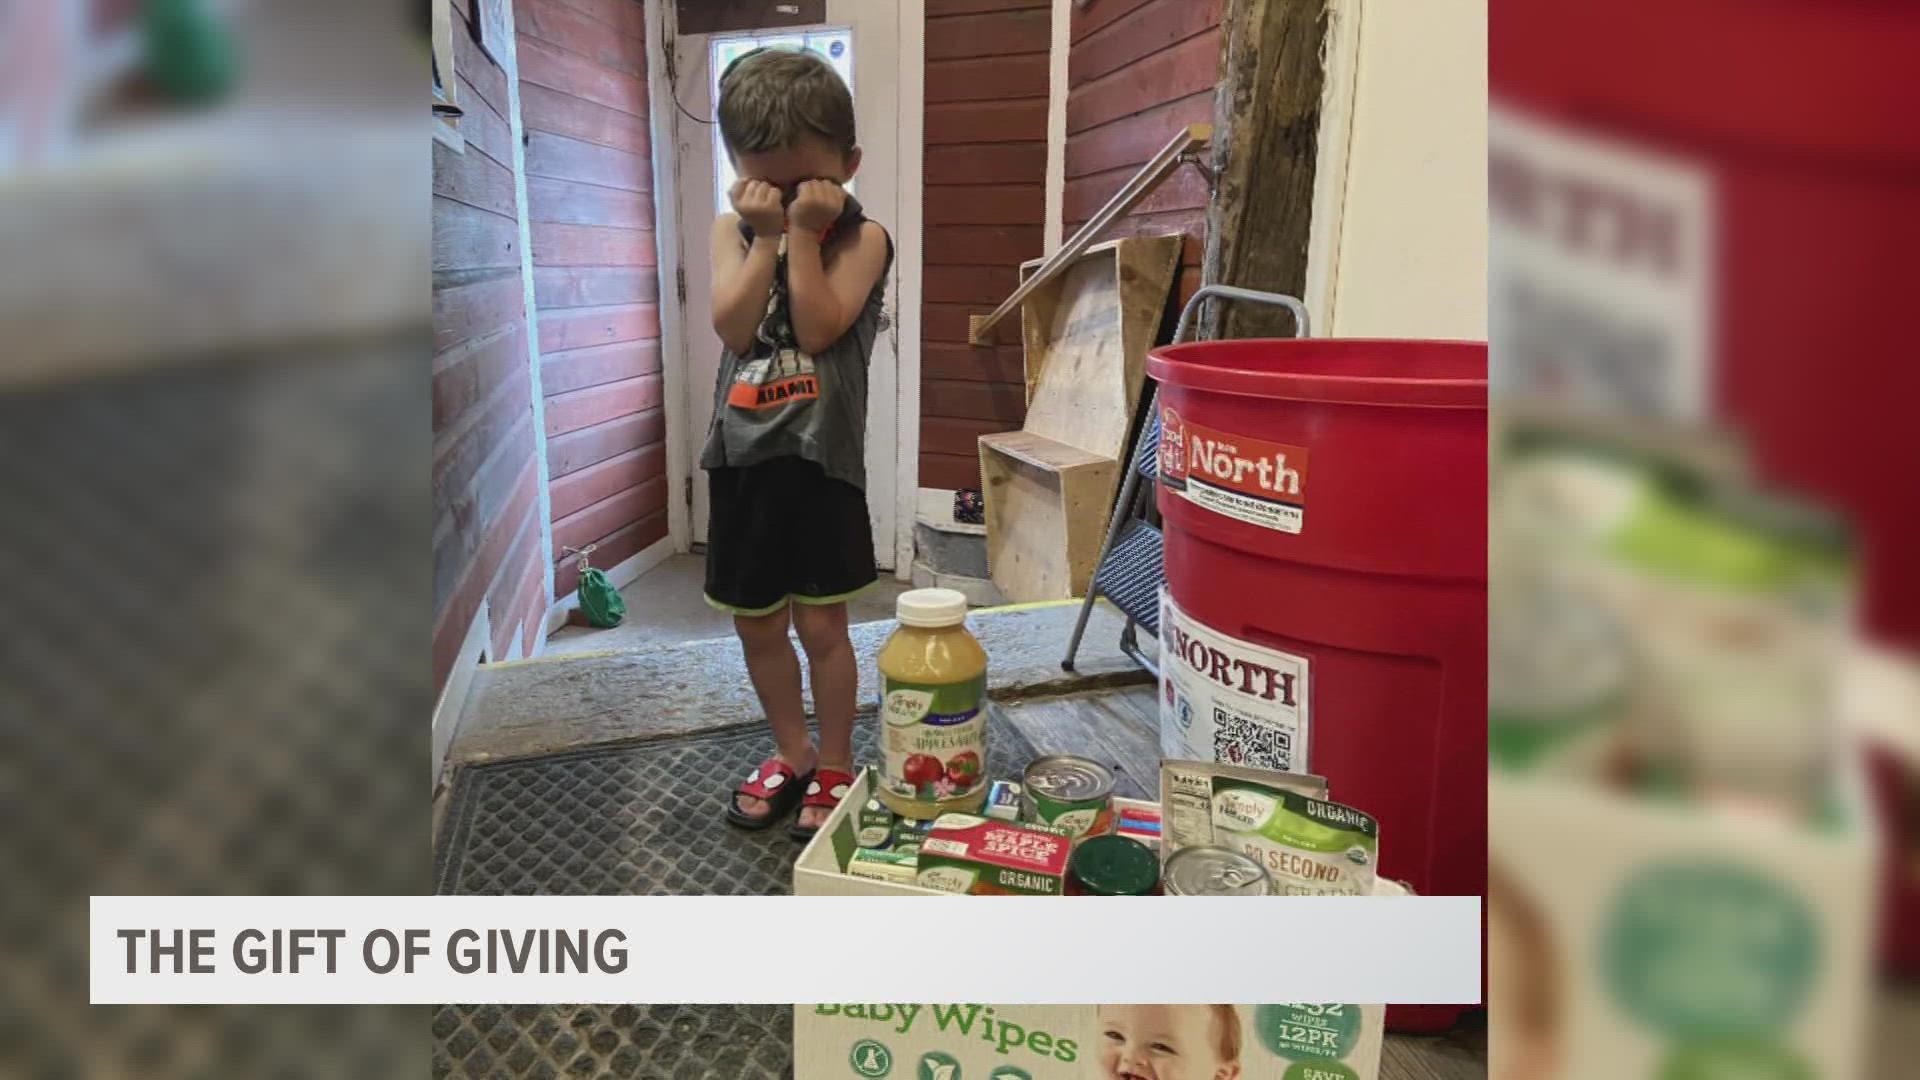 5-year-old William had a cake and a party, but instead of getting presents, he decided to give back instead.